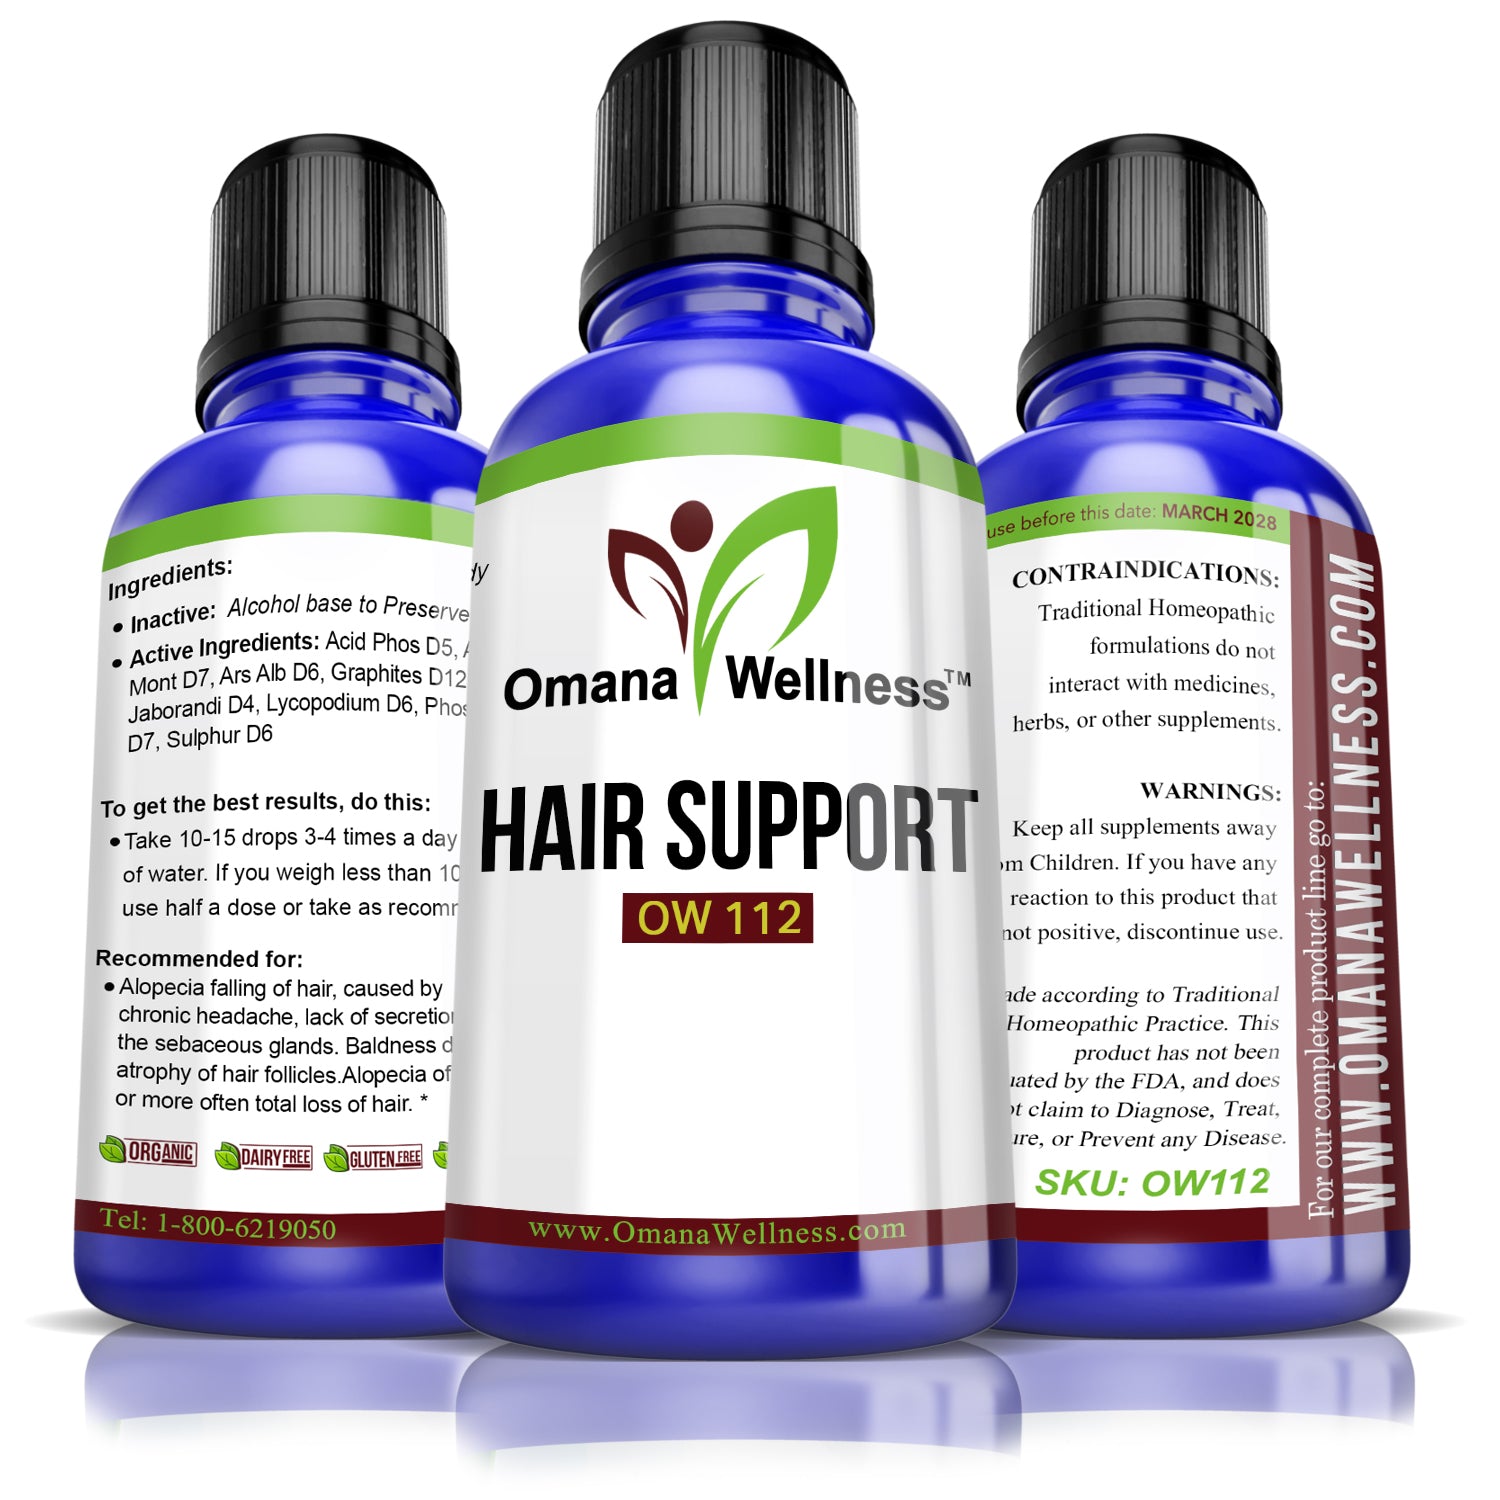 HAIR SUPPORT OW 112